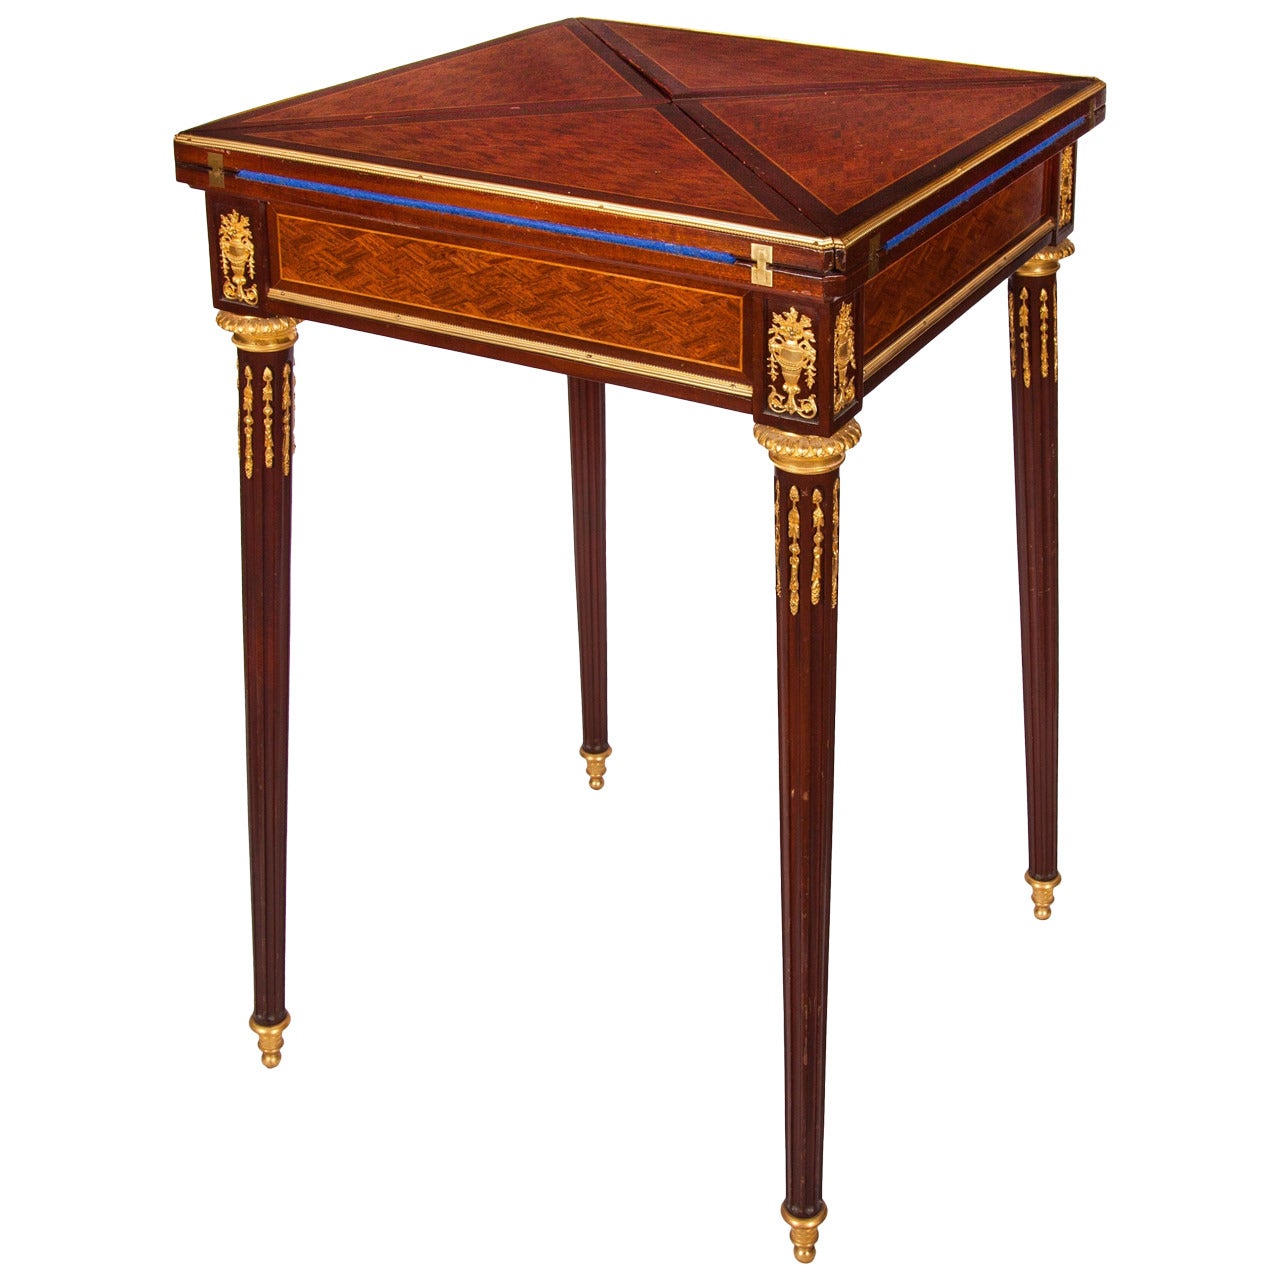 Ormolu-Mounted Rosewood and Mahogany Folding Card Table by Sormani